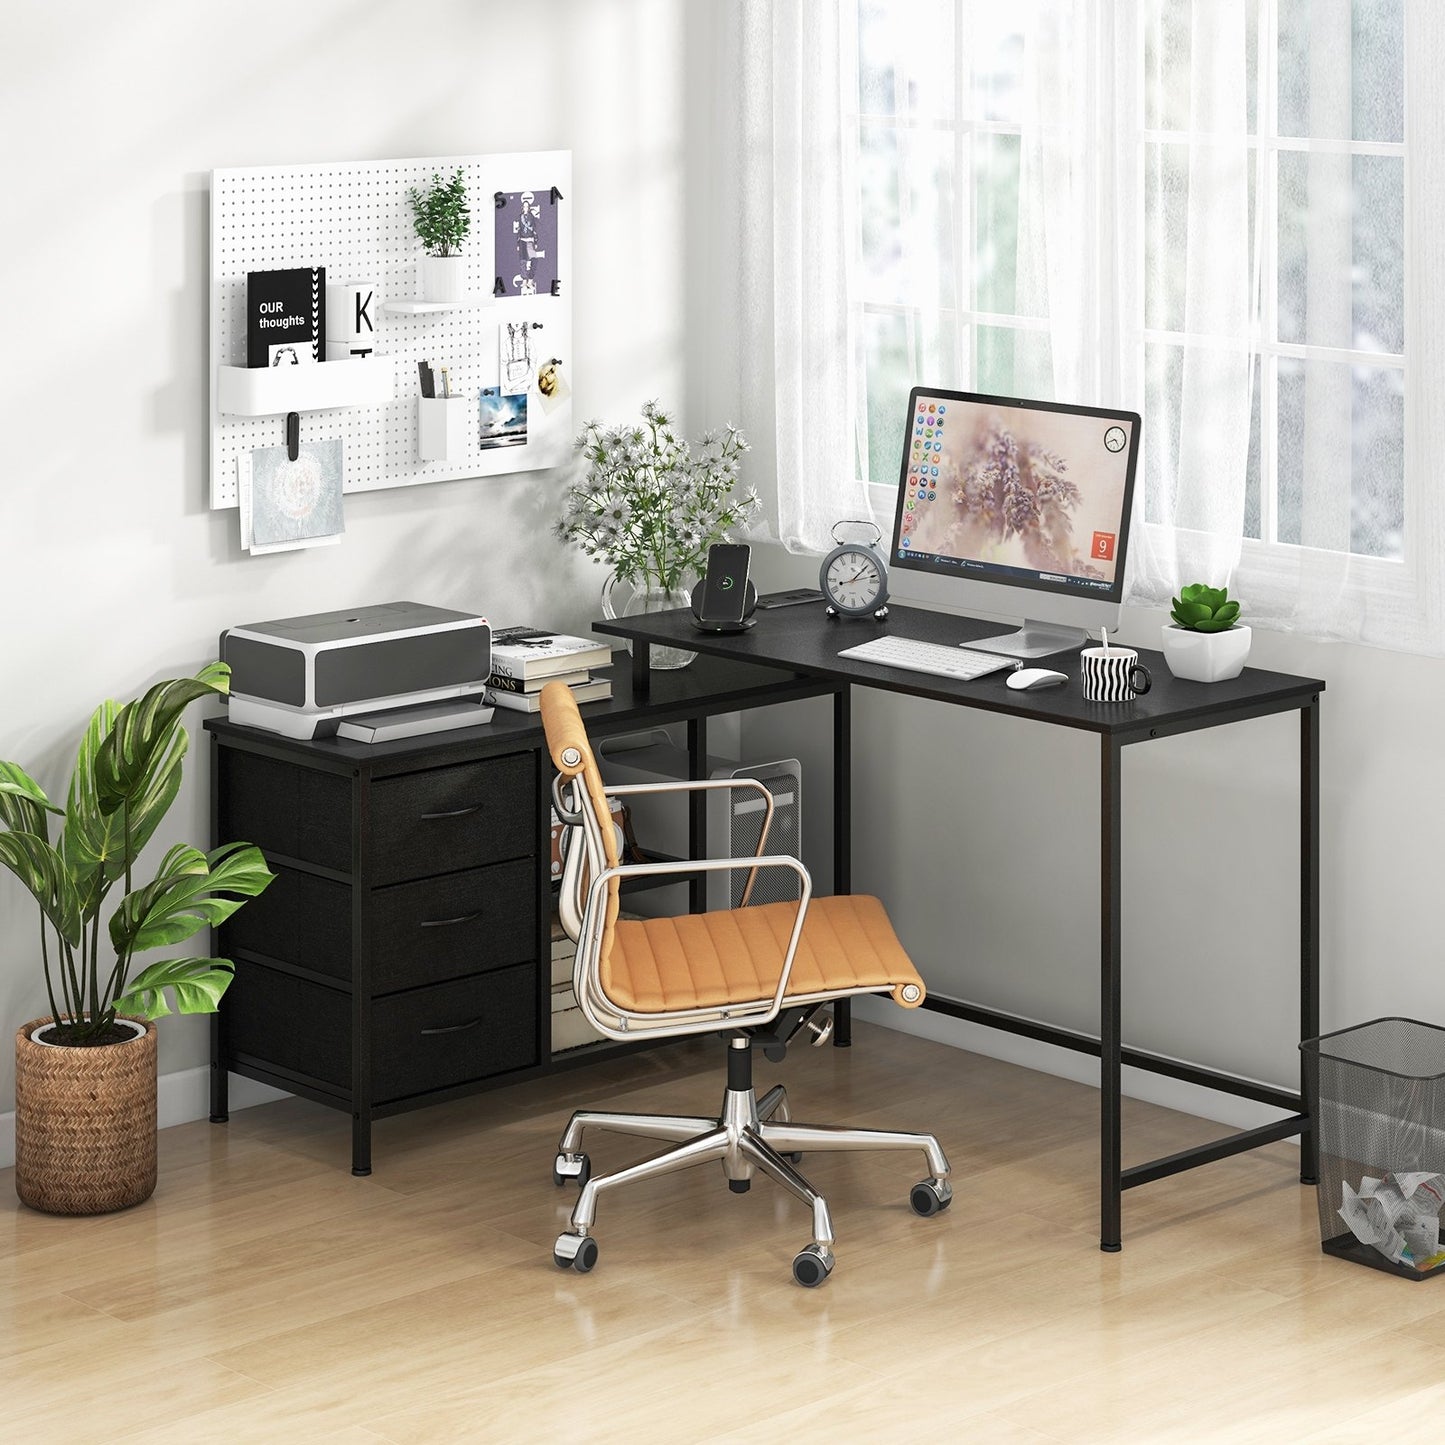 L-shaped Computer Desk with Power Outlet for Working Studying Gaming, Black